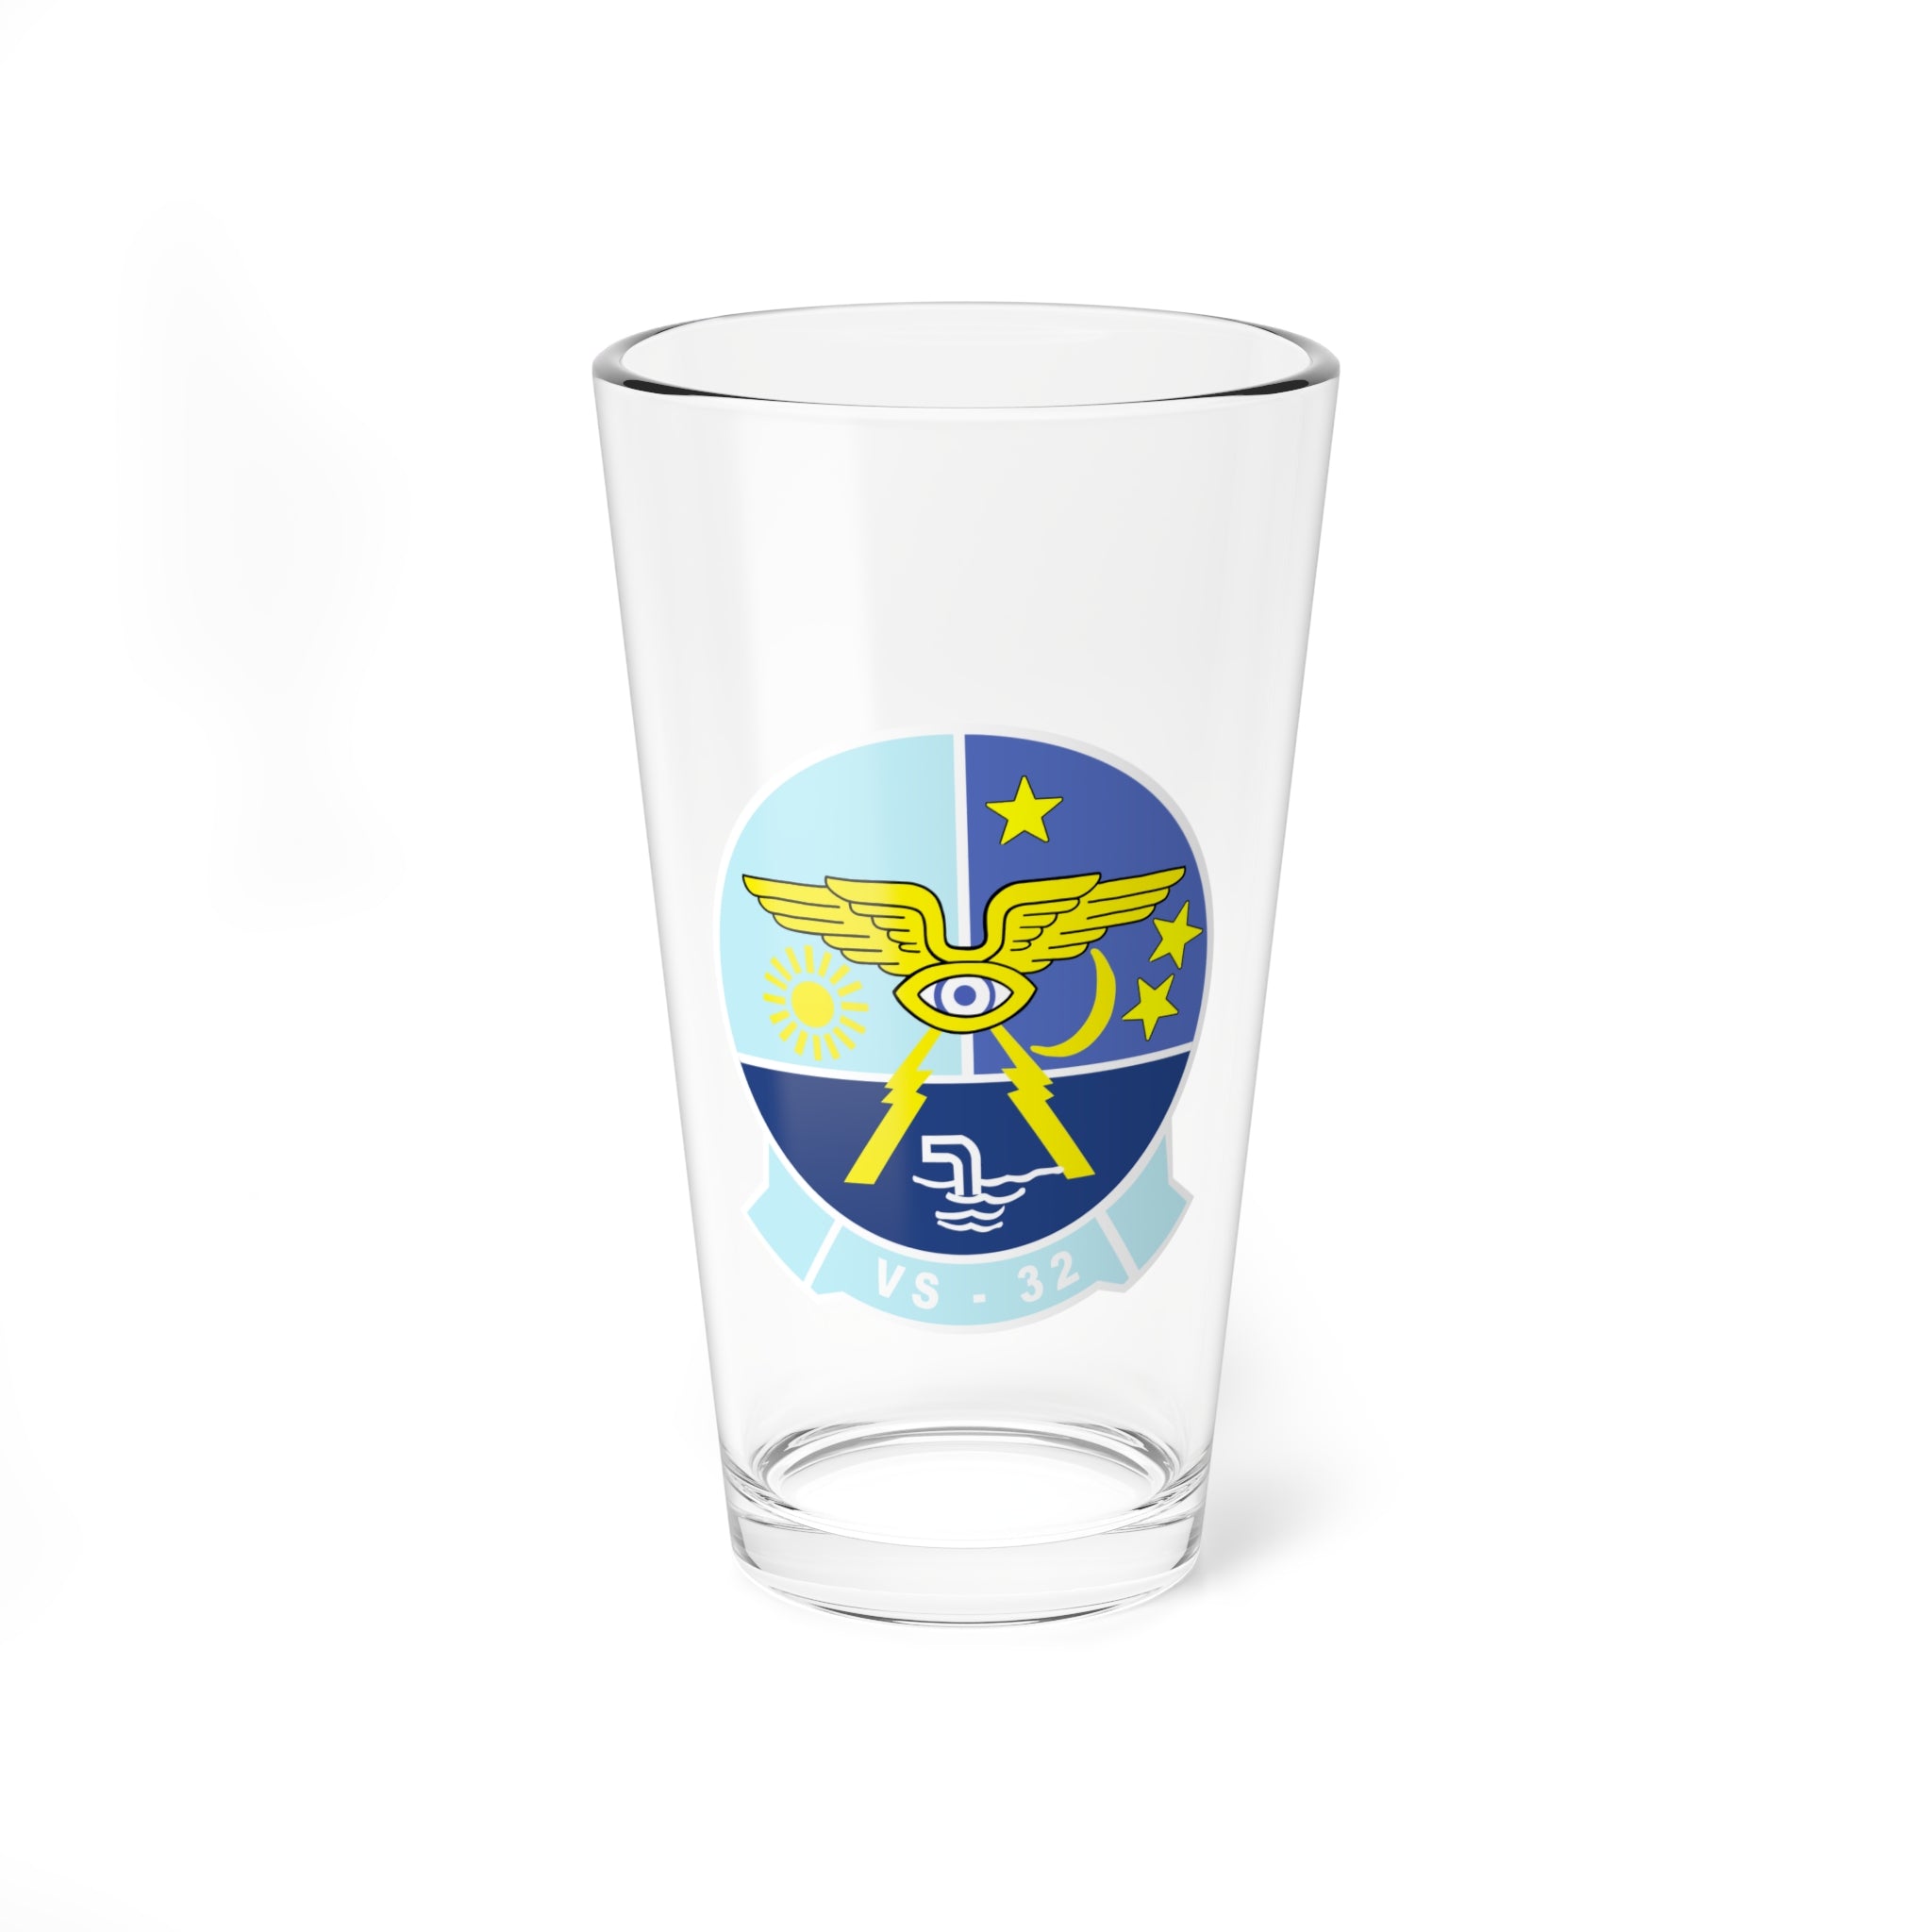 VS-32 "Maulers Pint Glass US Navy Sea Control Squadron flying the S_3 Viking for retieed and veteran Sailors